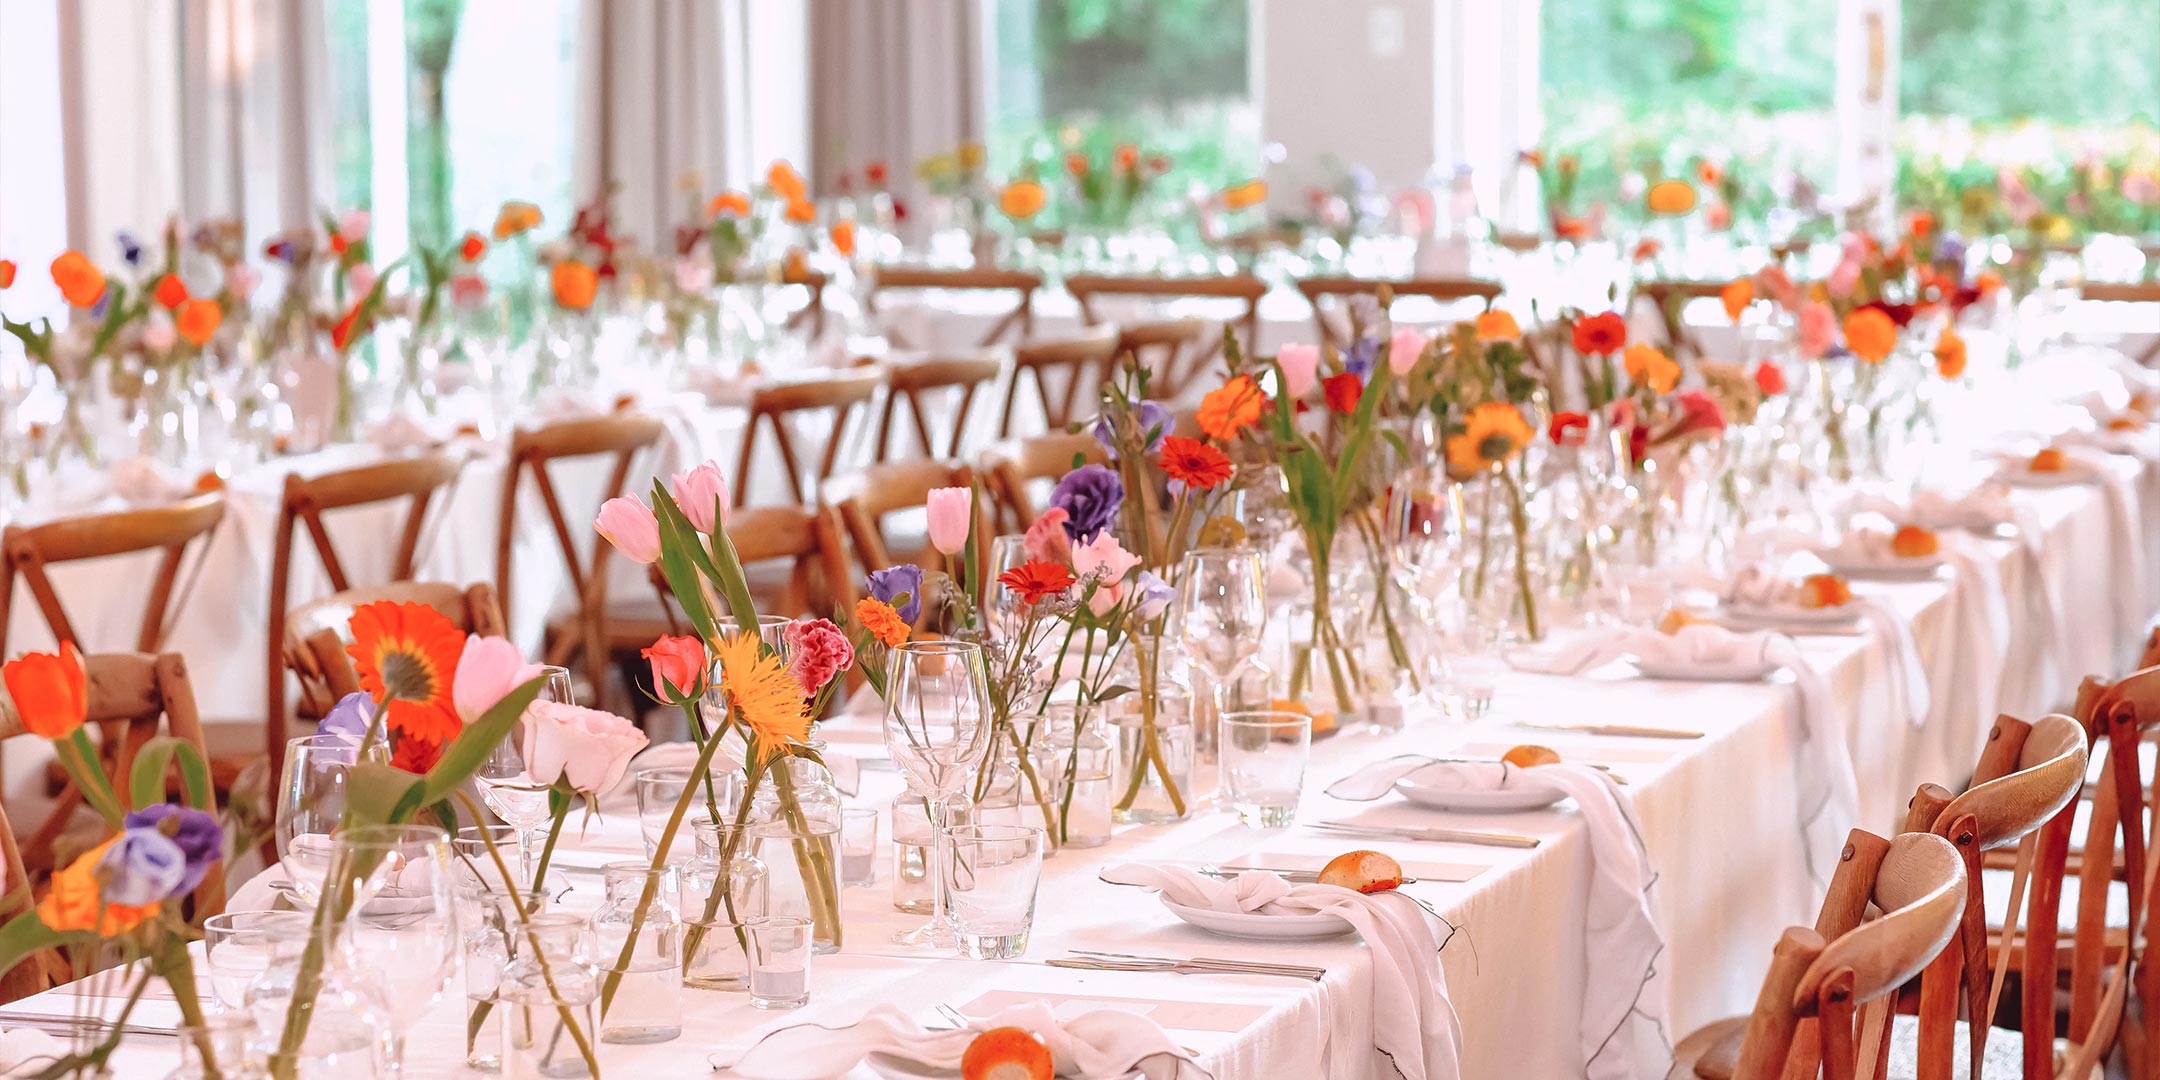 Elegant wedding reception setup with long tables adorned with colourful floral arrangements and wooden chairs. Let's chat about making your wedding day perfect. Weddings. Fabulous Flowers and Gifts.